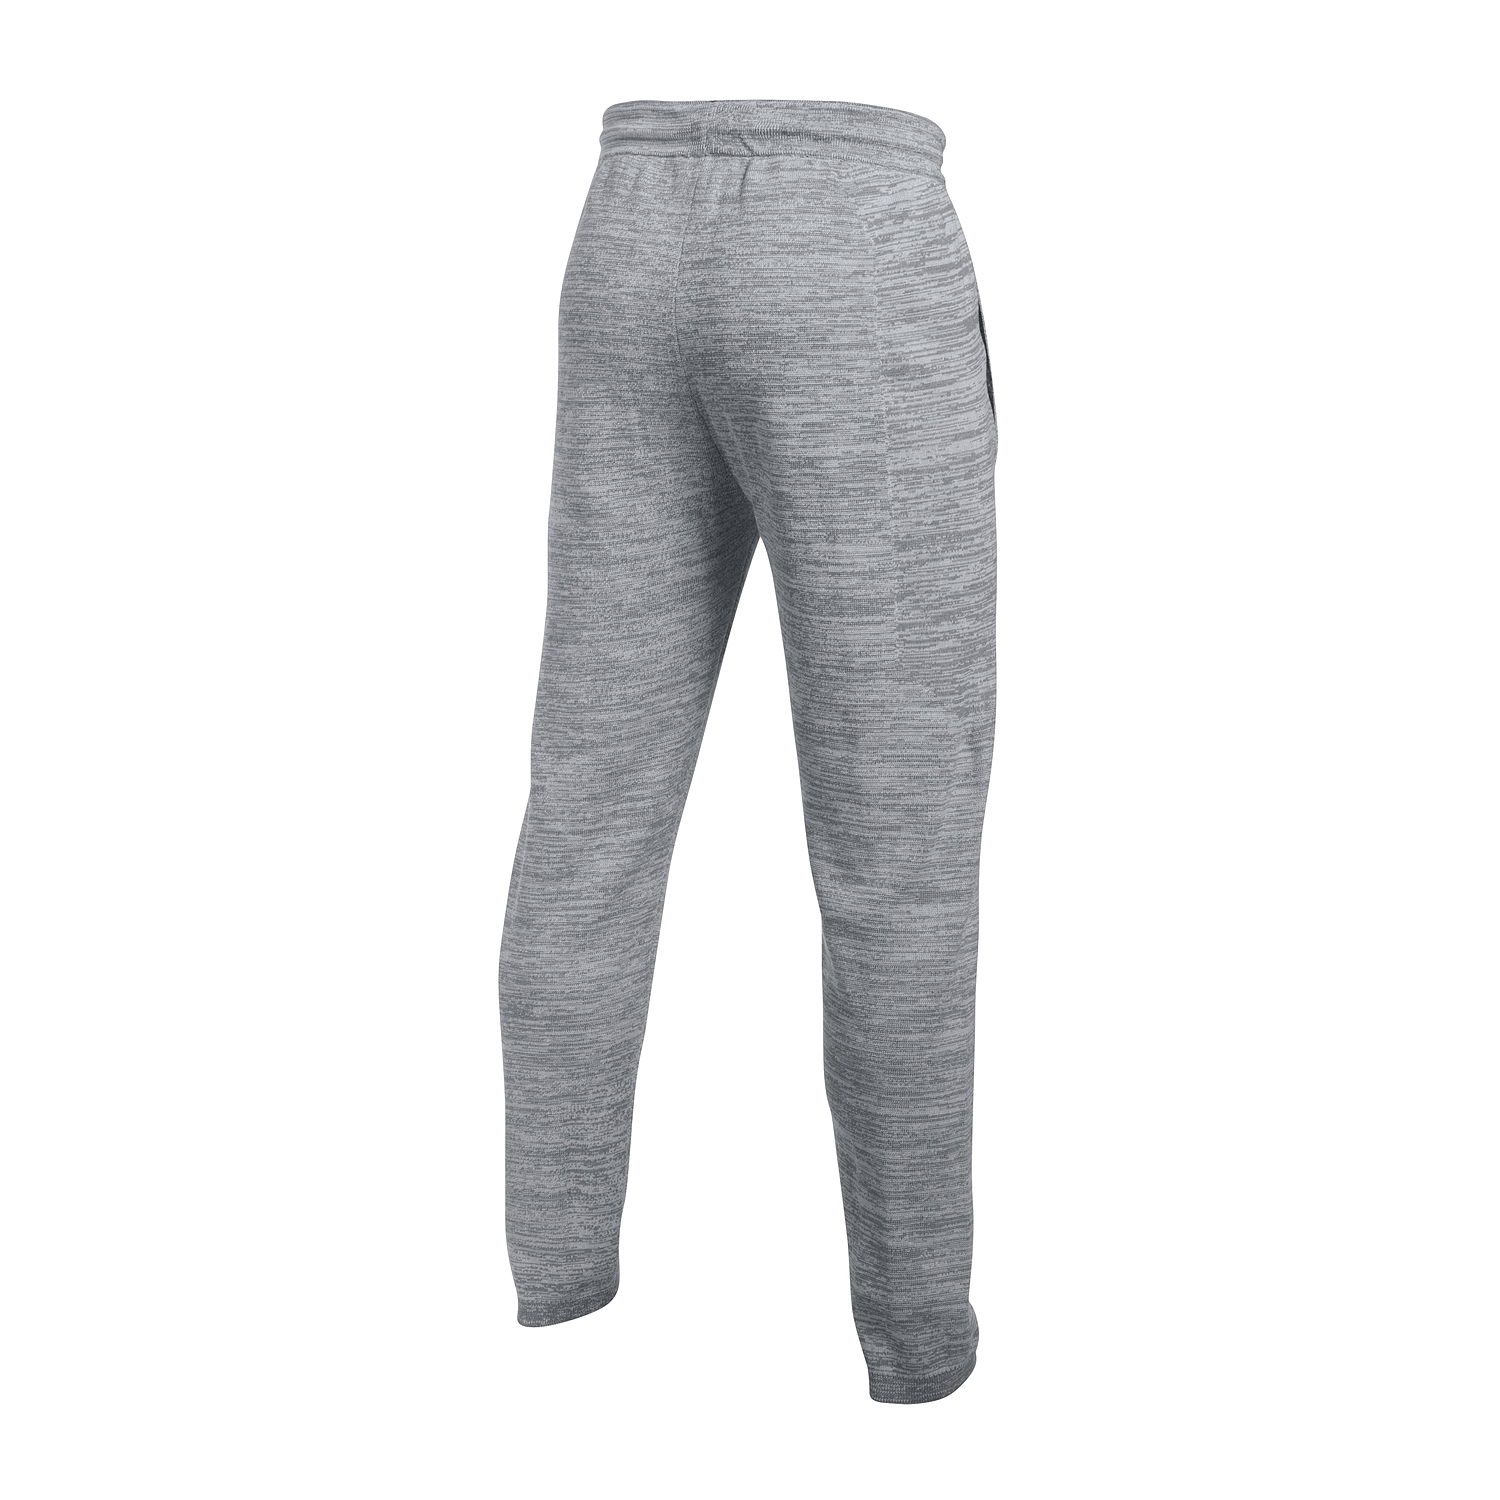 Under Armour Stephen Curry 'SC30' Mens True Gray Heather Jogger Sweat Pants $150